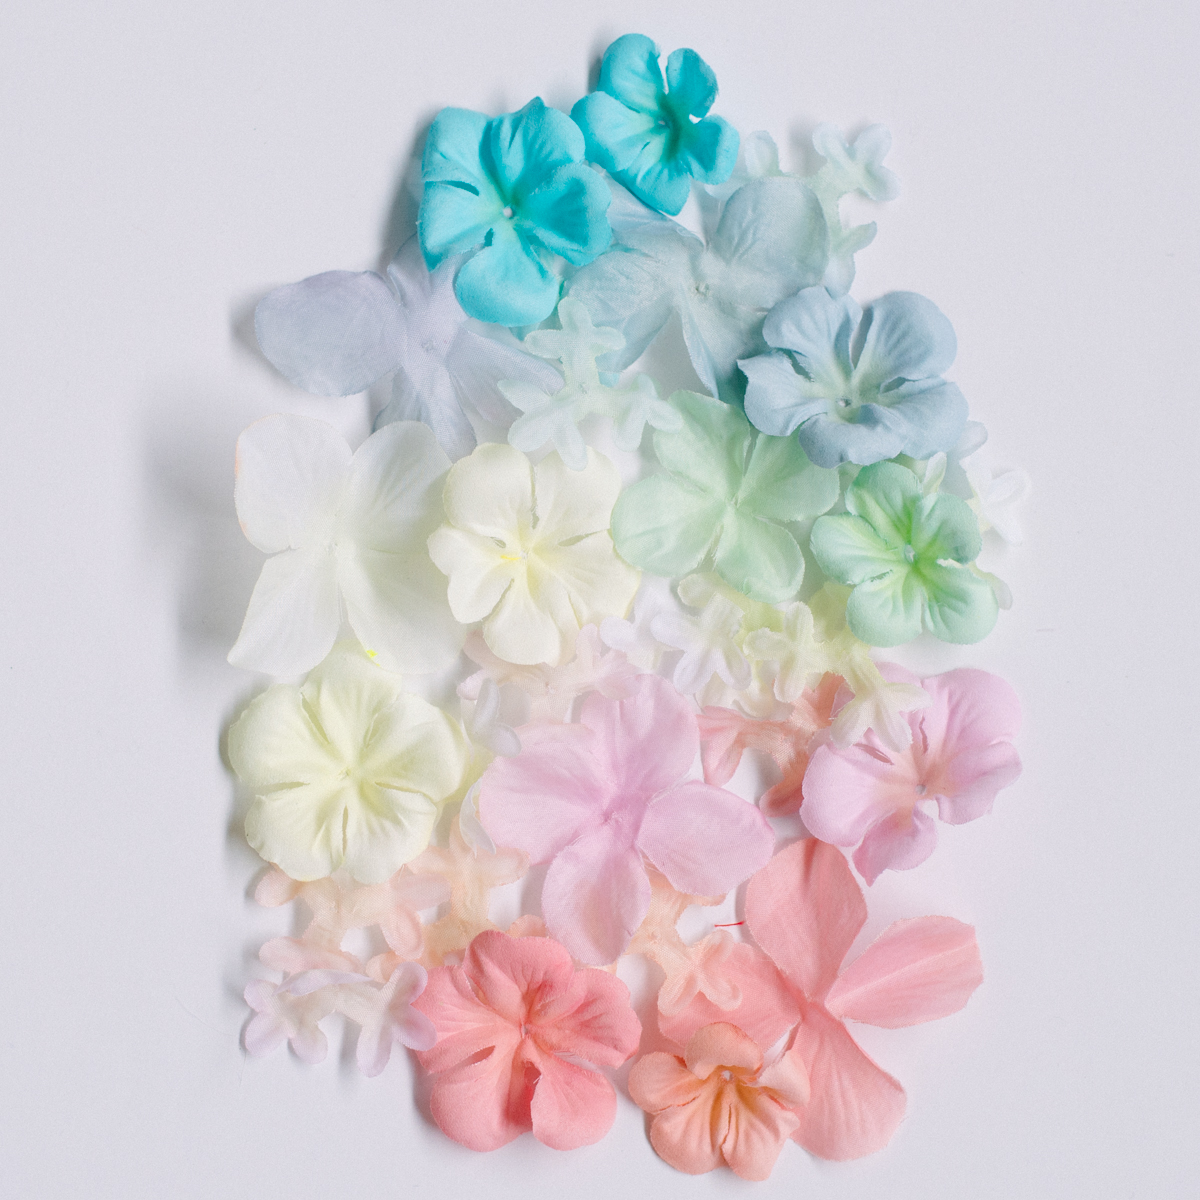 A colorful array of fabric flowers that have been dyed using Rit dye